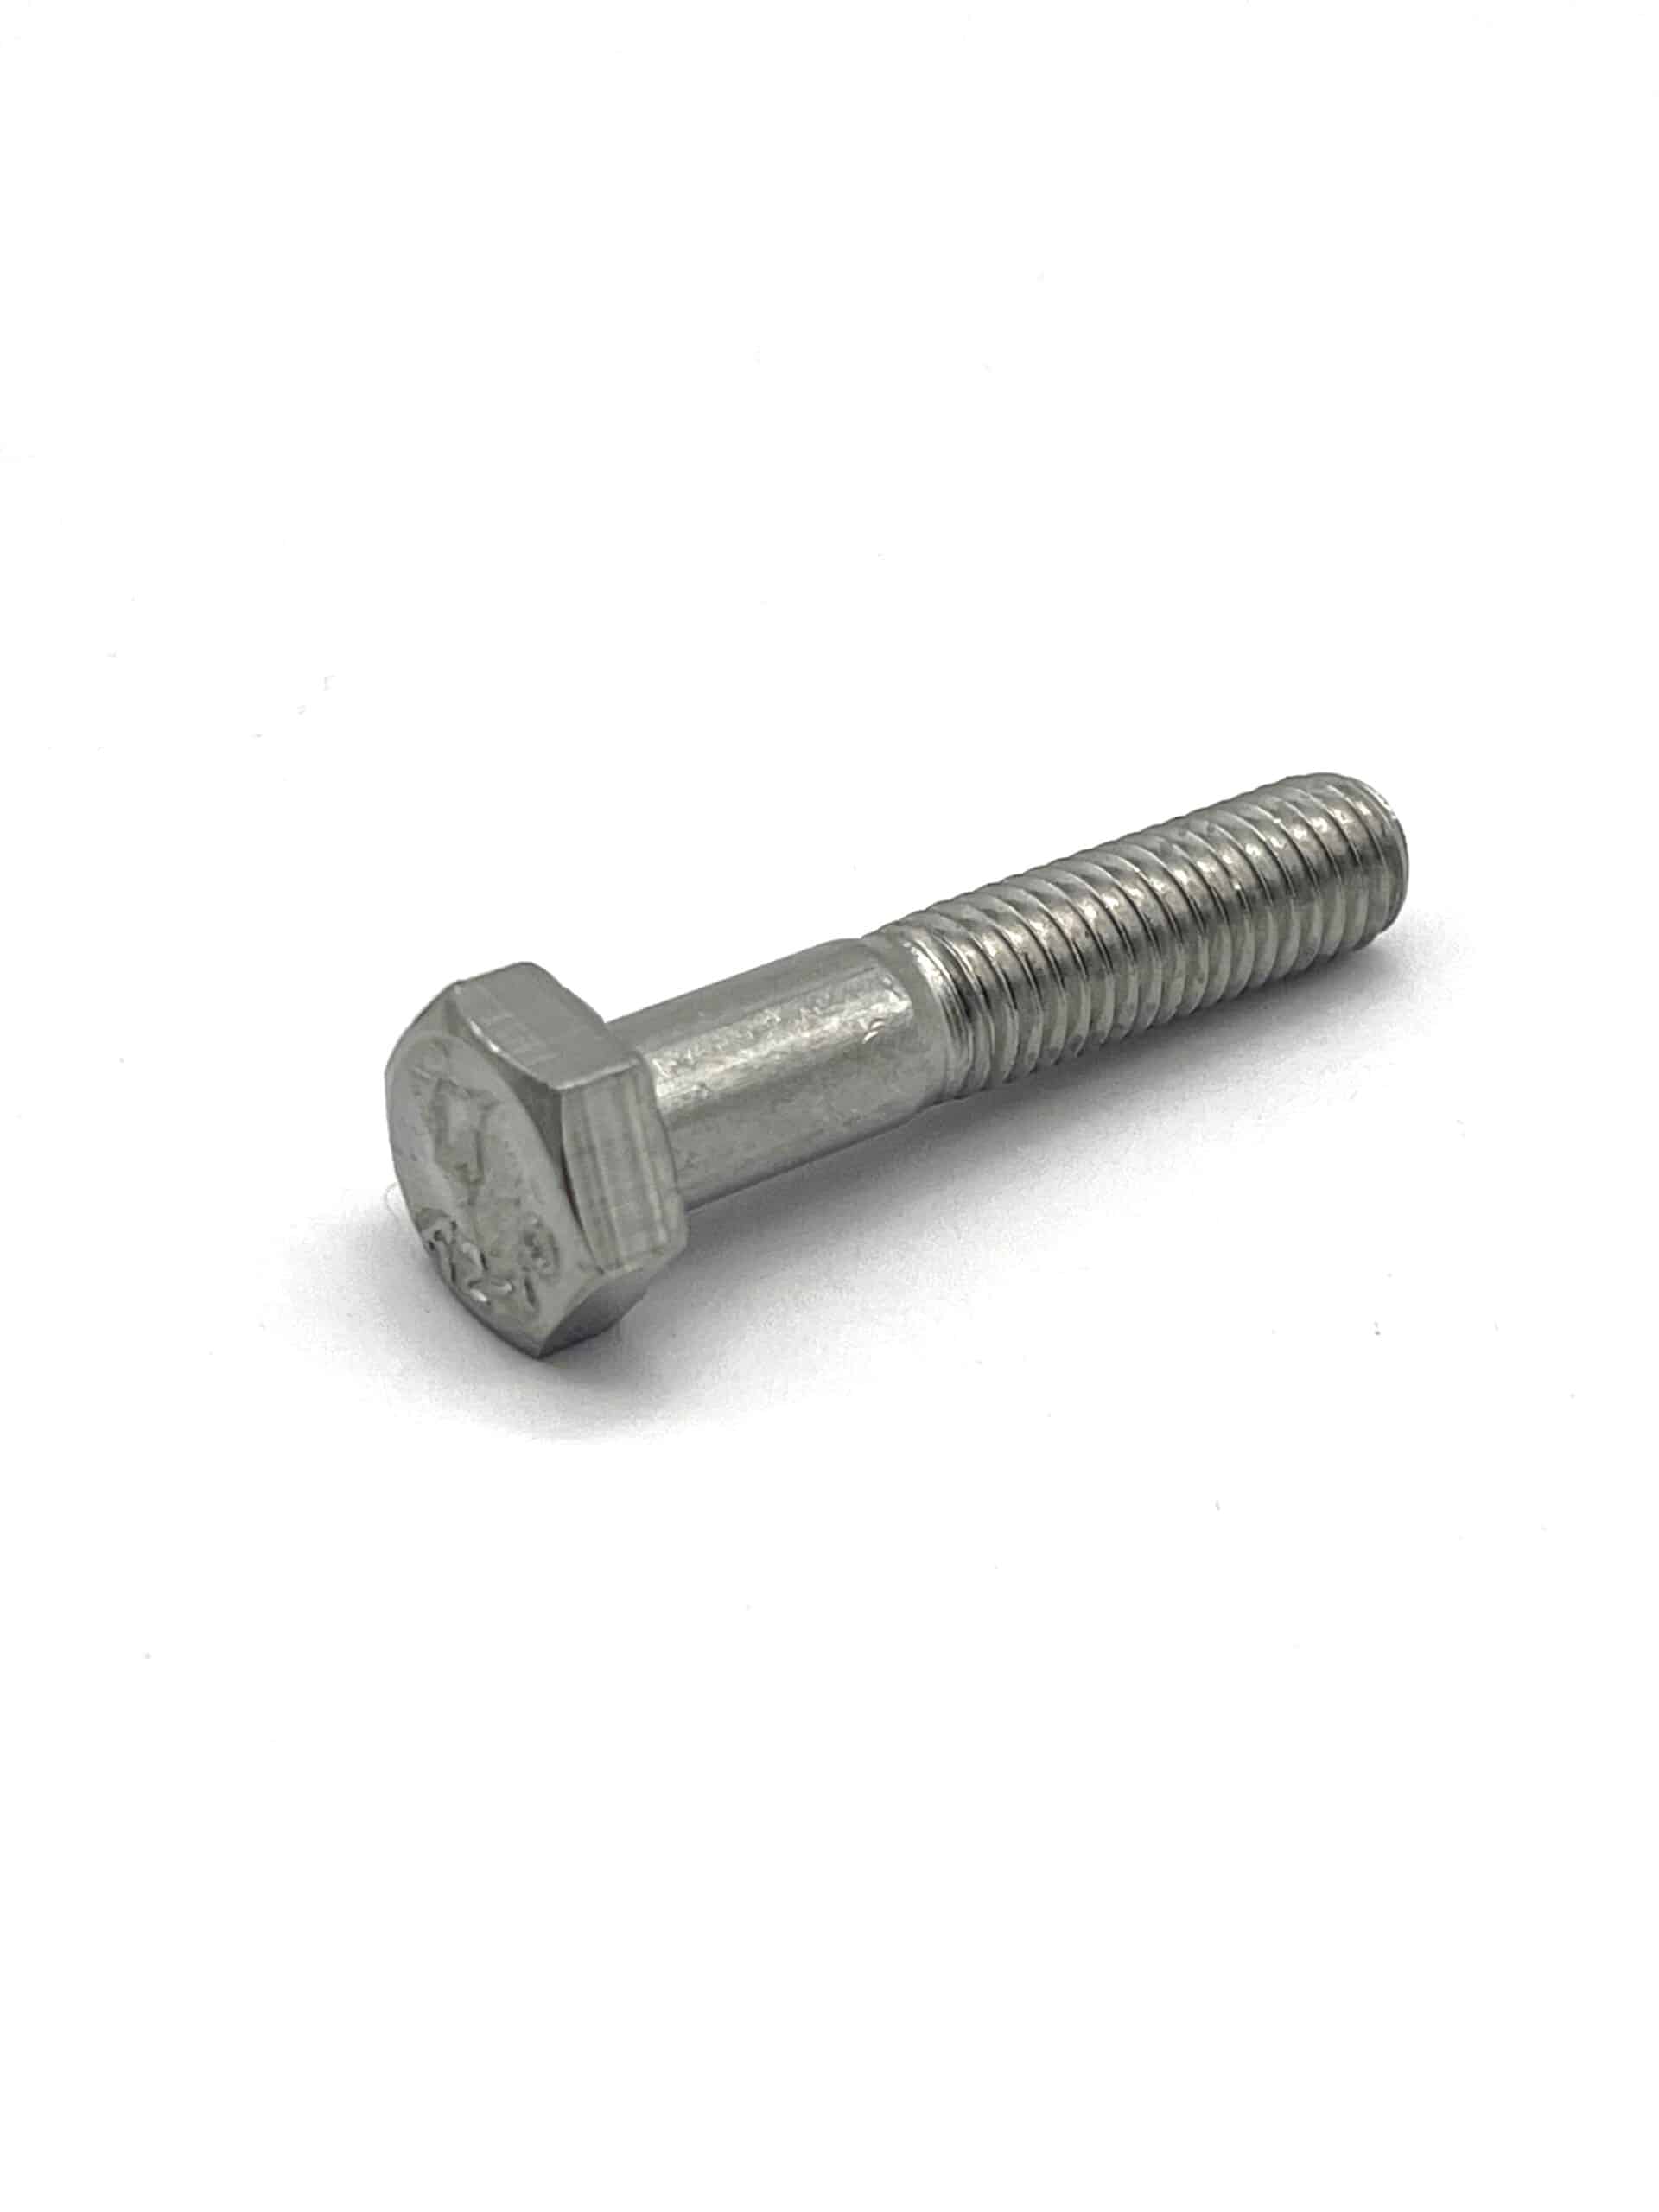 Stainless Steel Bolts - Part Thread